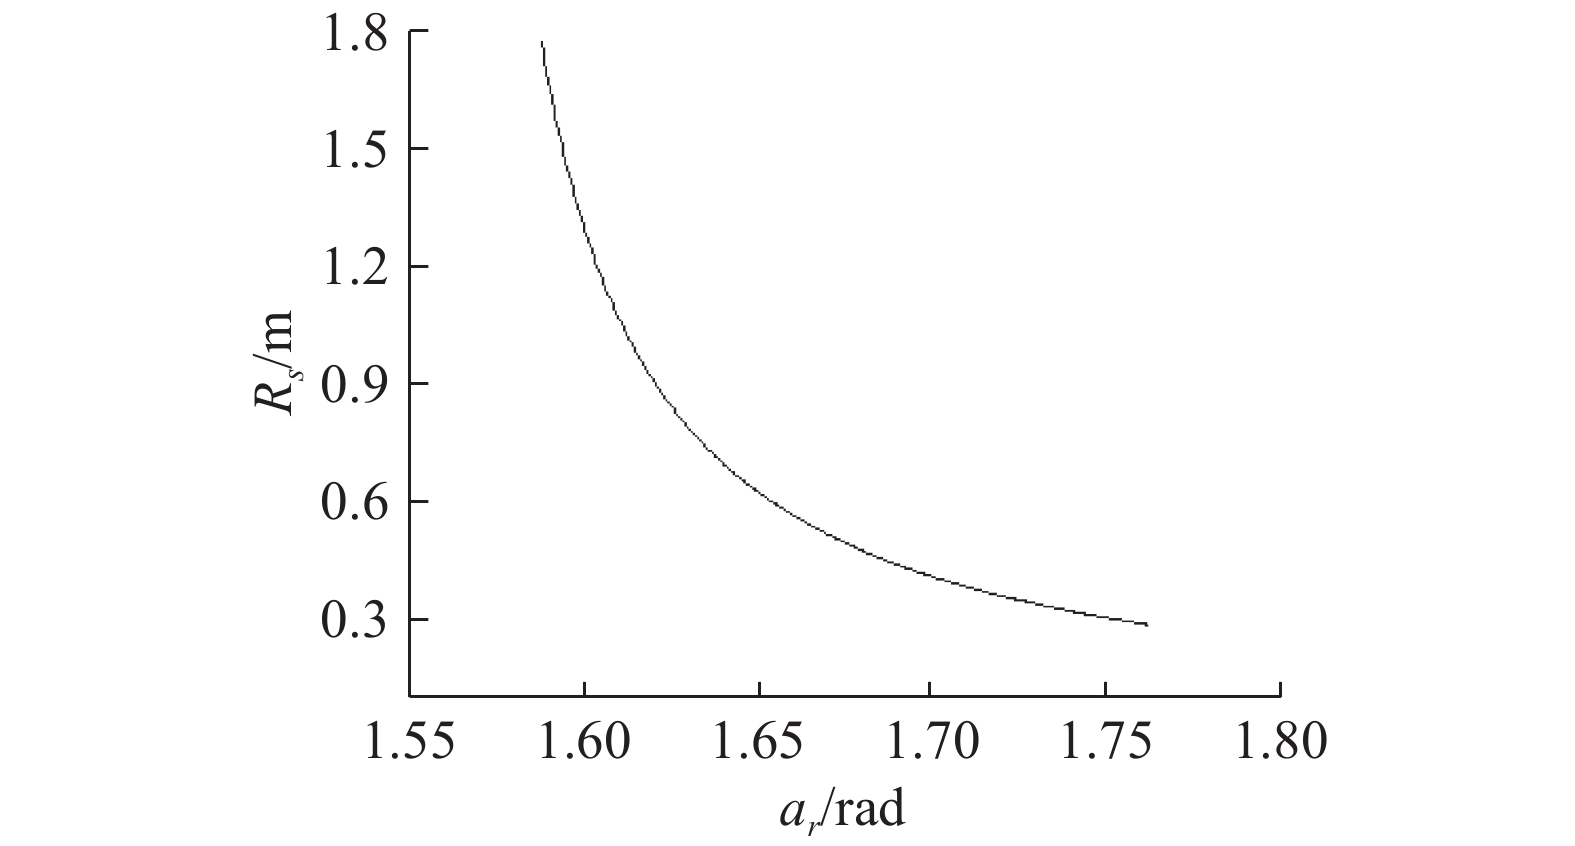 Curve of Rs with the changes in αr